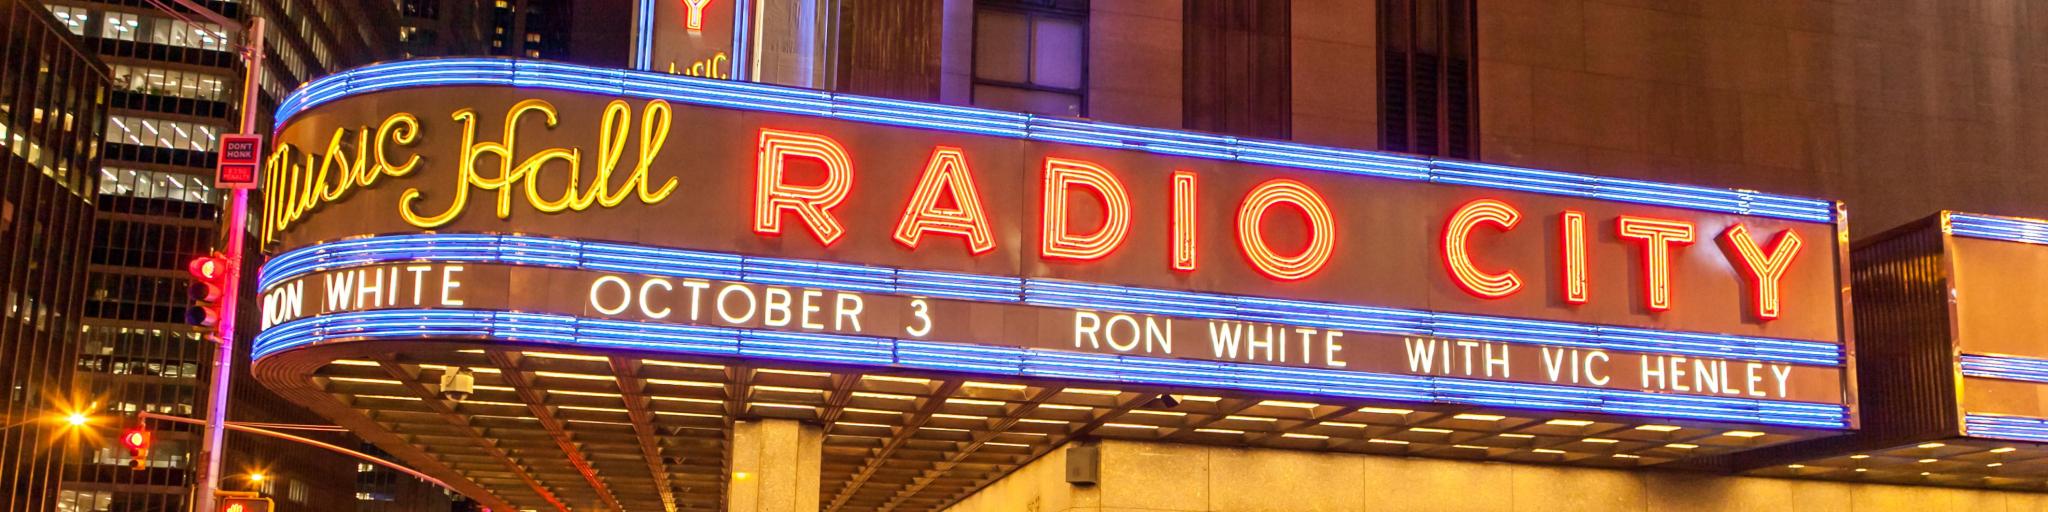 Lit up sign of the Radio City Music Hall, New York, with people walking past